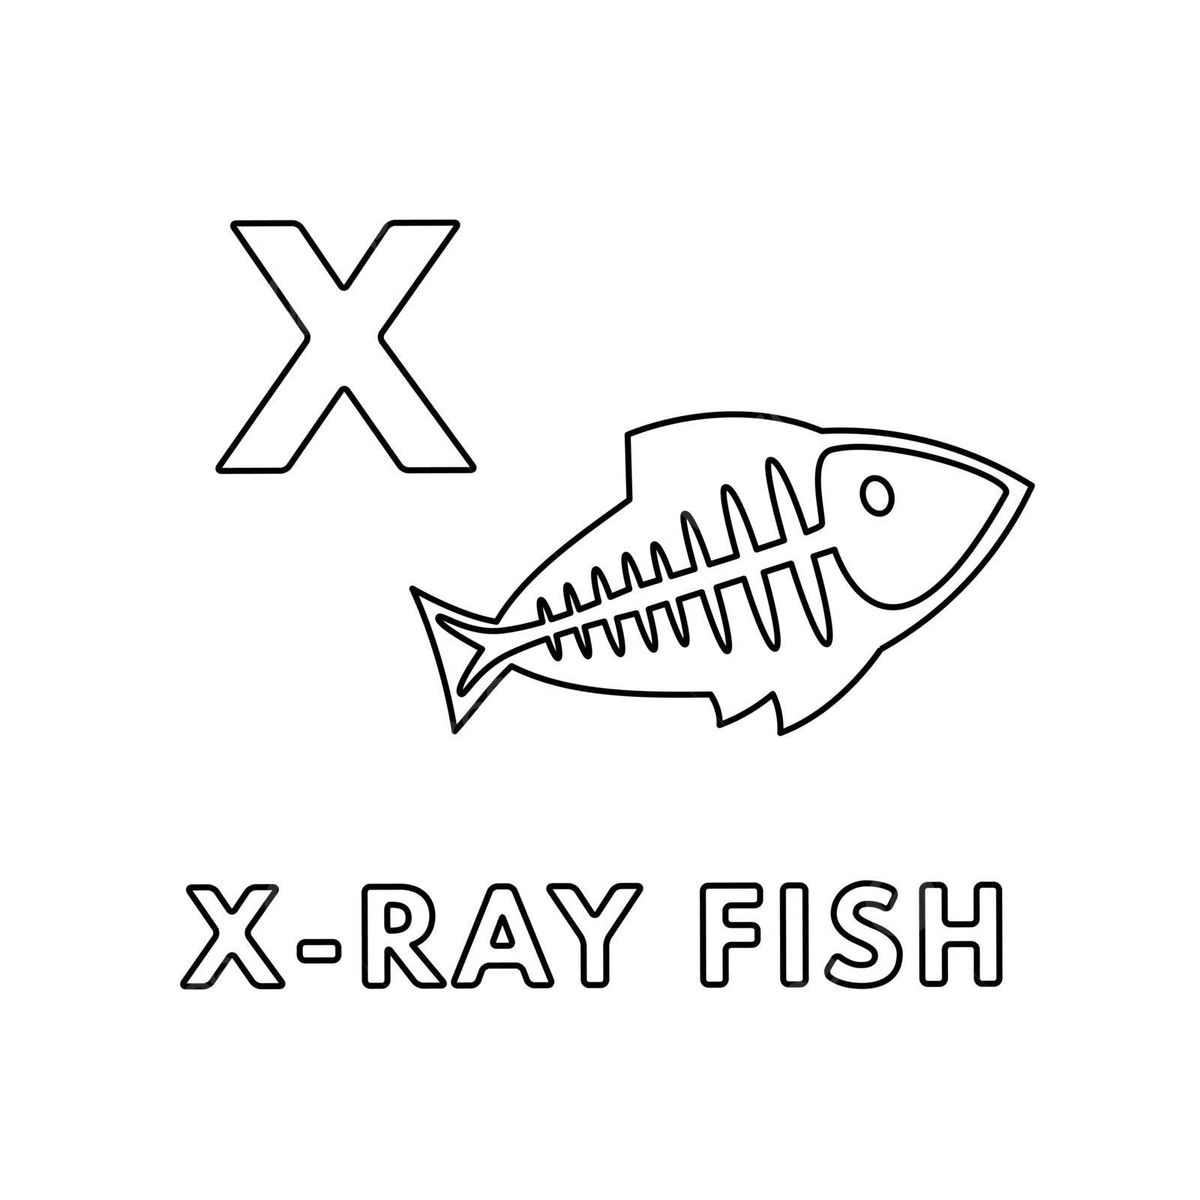 Coloring pages of cute cartoon animals in alphabetical order featuring xray fish as vectors vector smart print typography png and vector with transparent background for free download